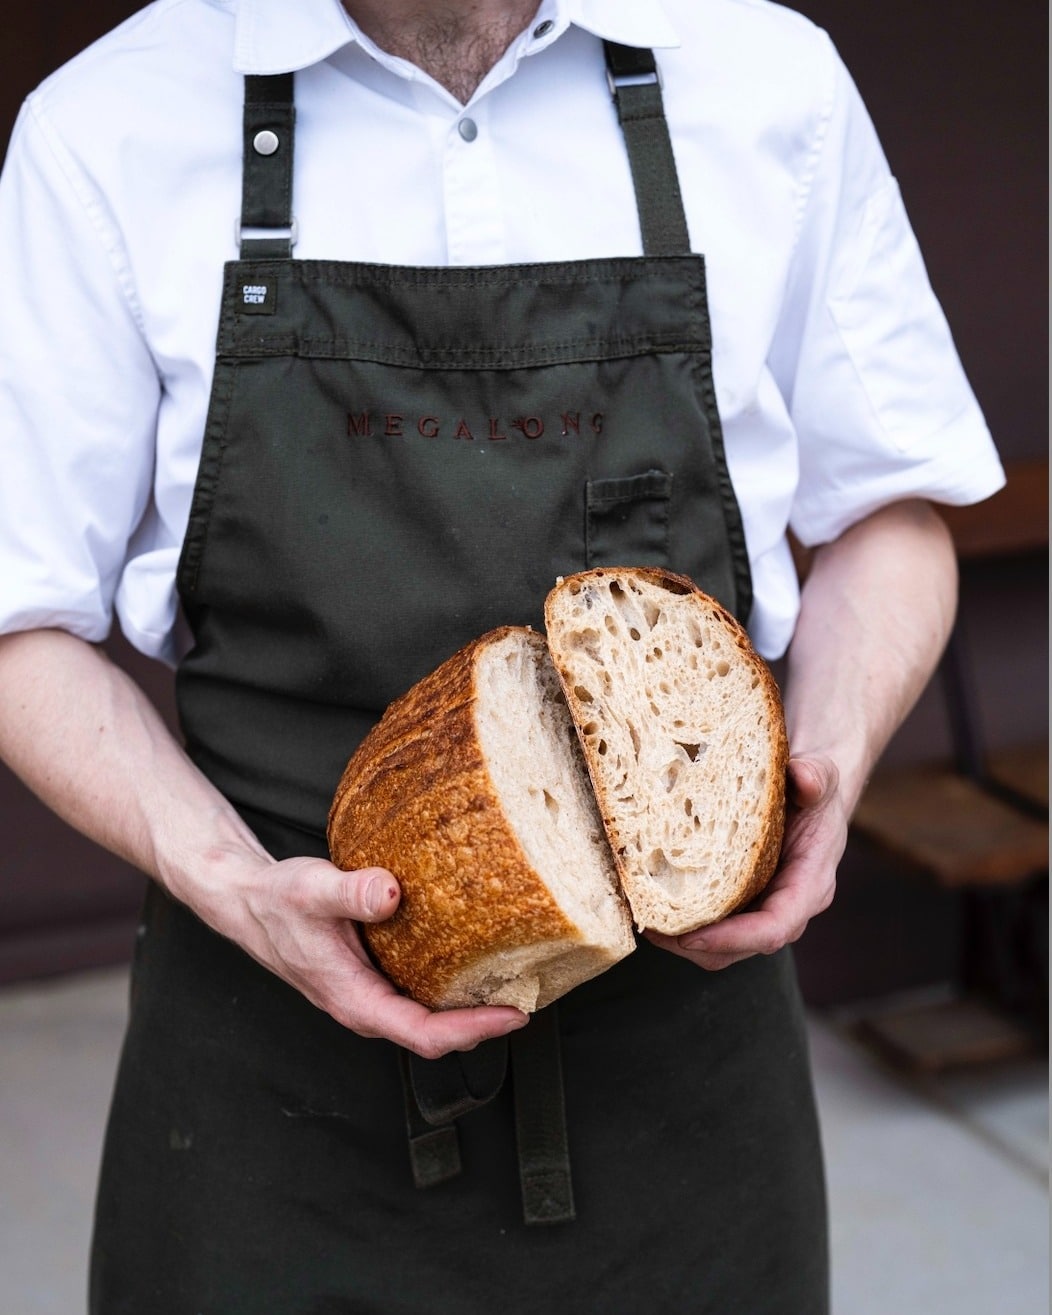 Our organic sourdough, baked in house, every day

#megalongvalley #bluemountains #nswrestaurant #freshbread #homemade